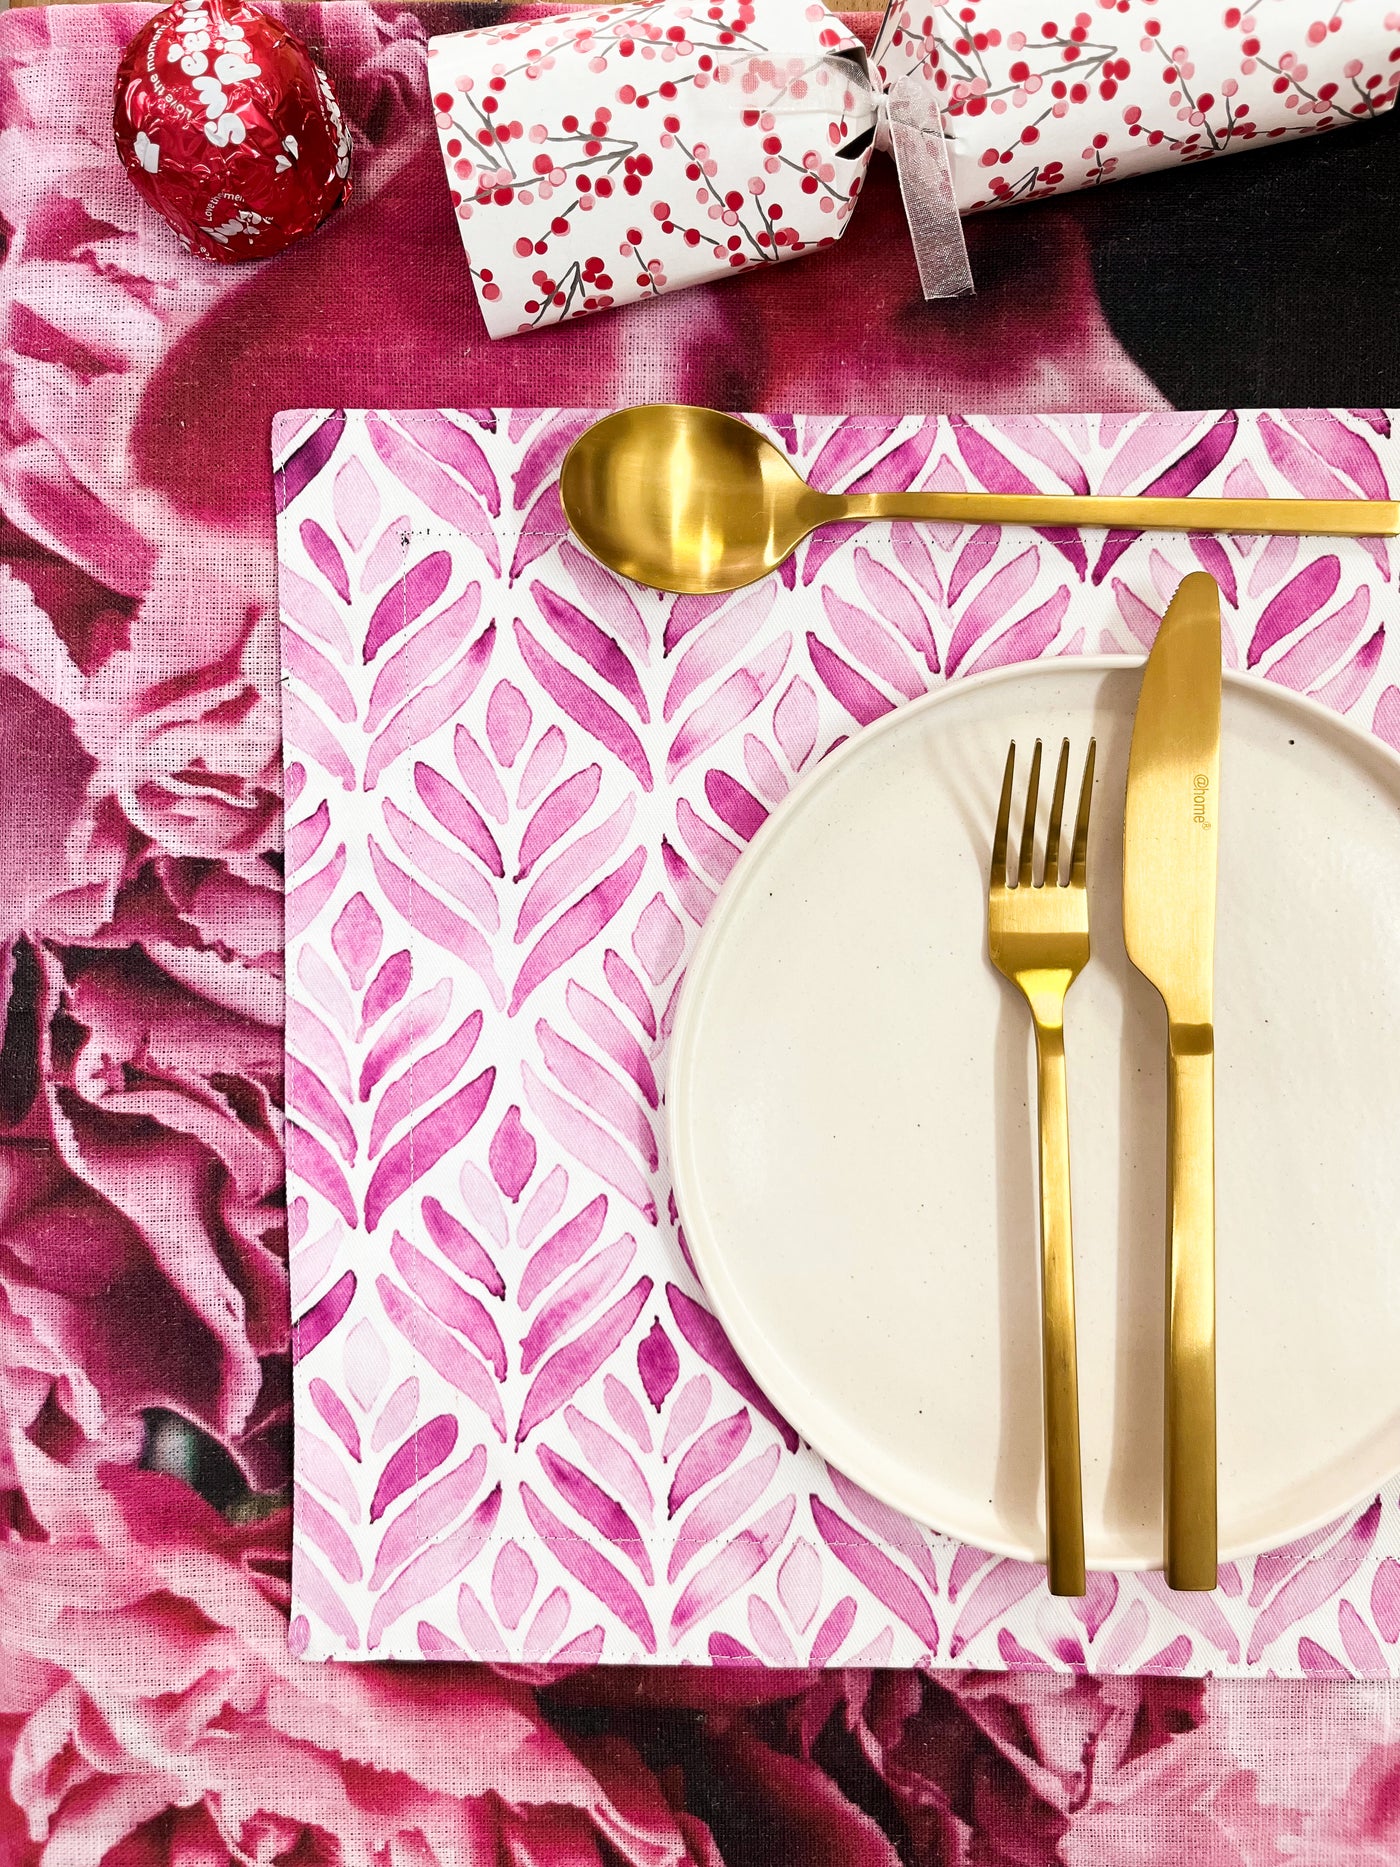 Golden Utensils on White Crockery on Flower Placemat on Floral Tablecloth